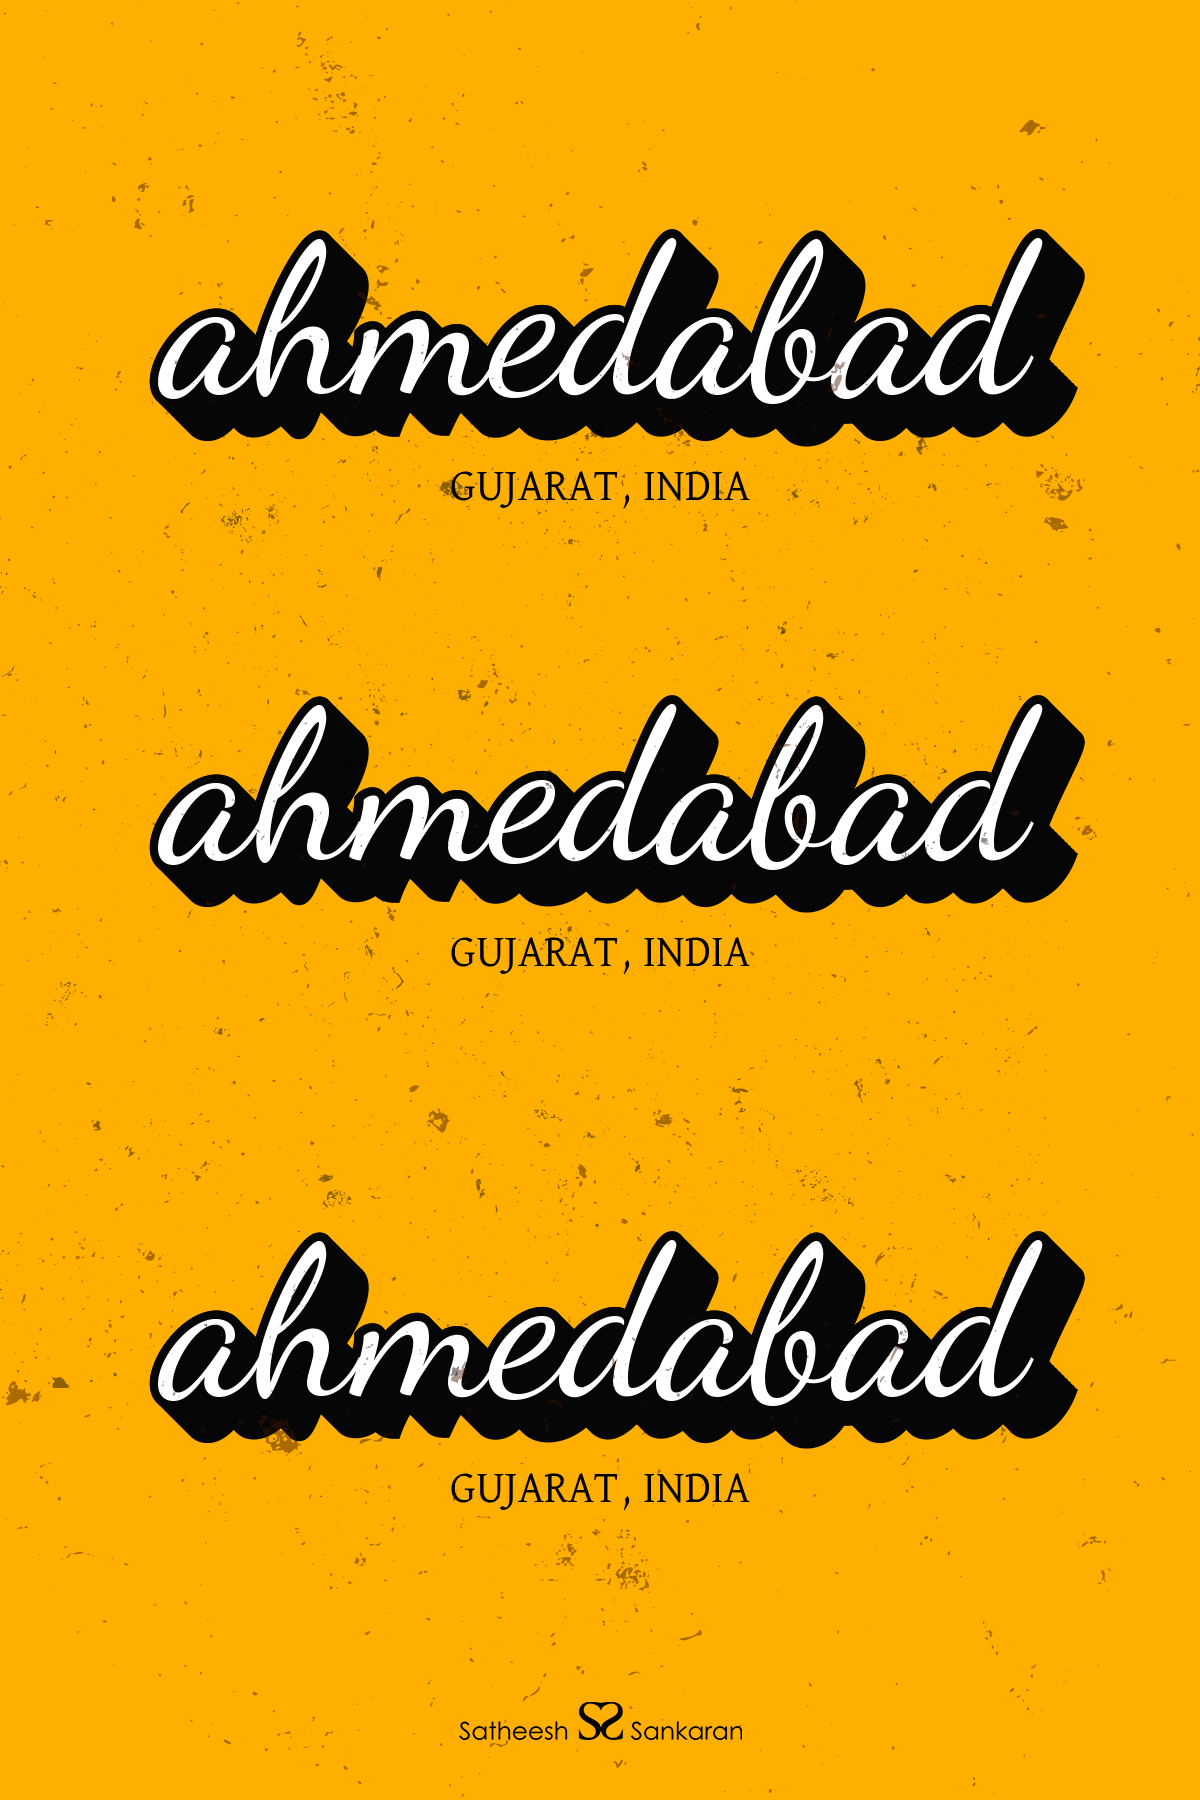 Ahmedabad, Gujarat in India - Typography Poster Design